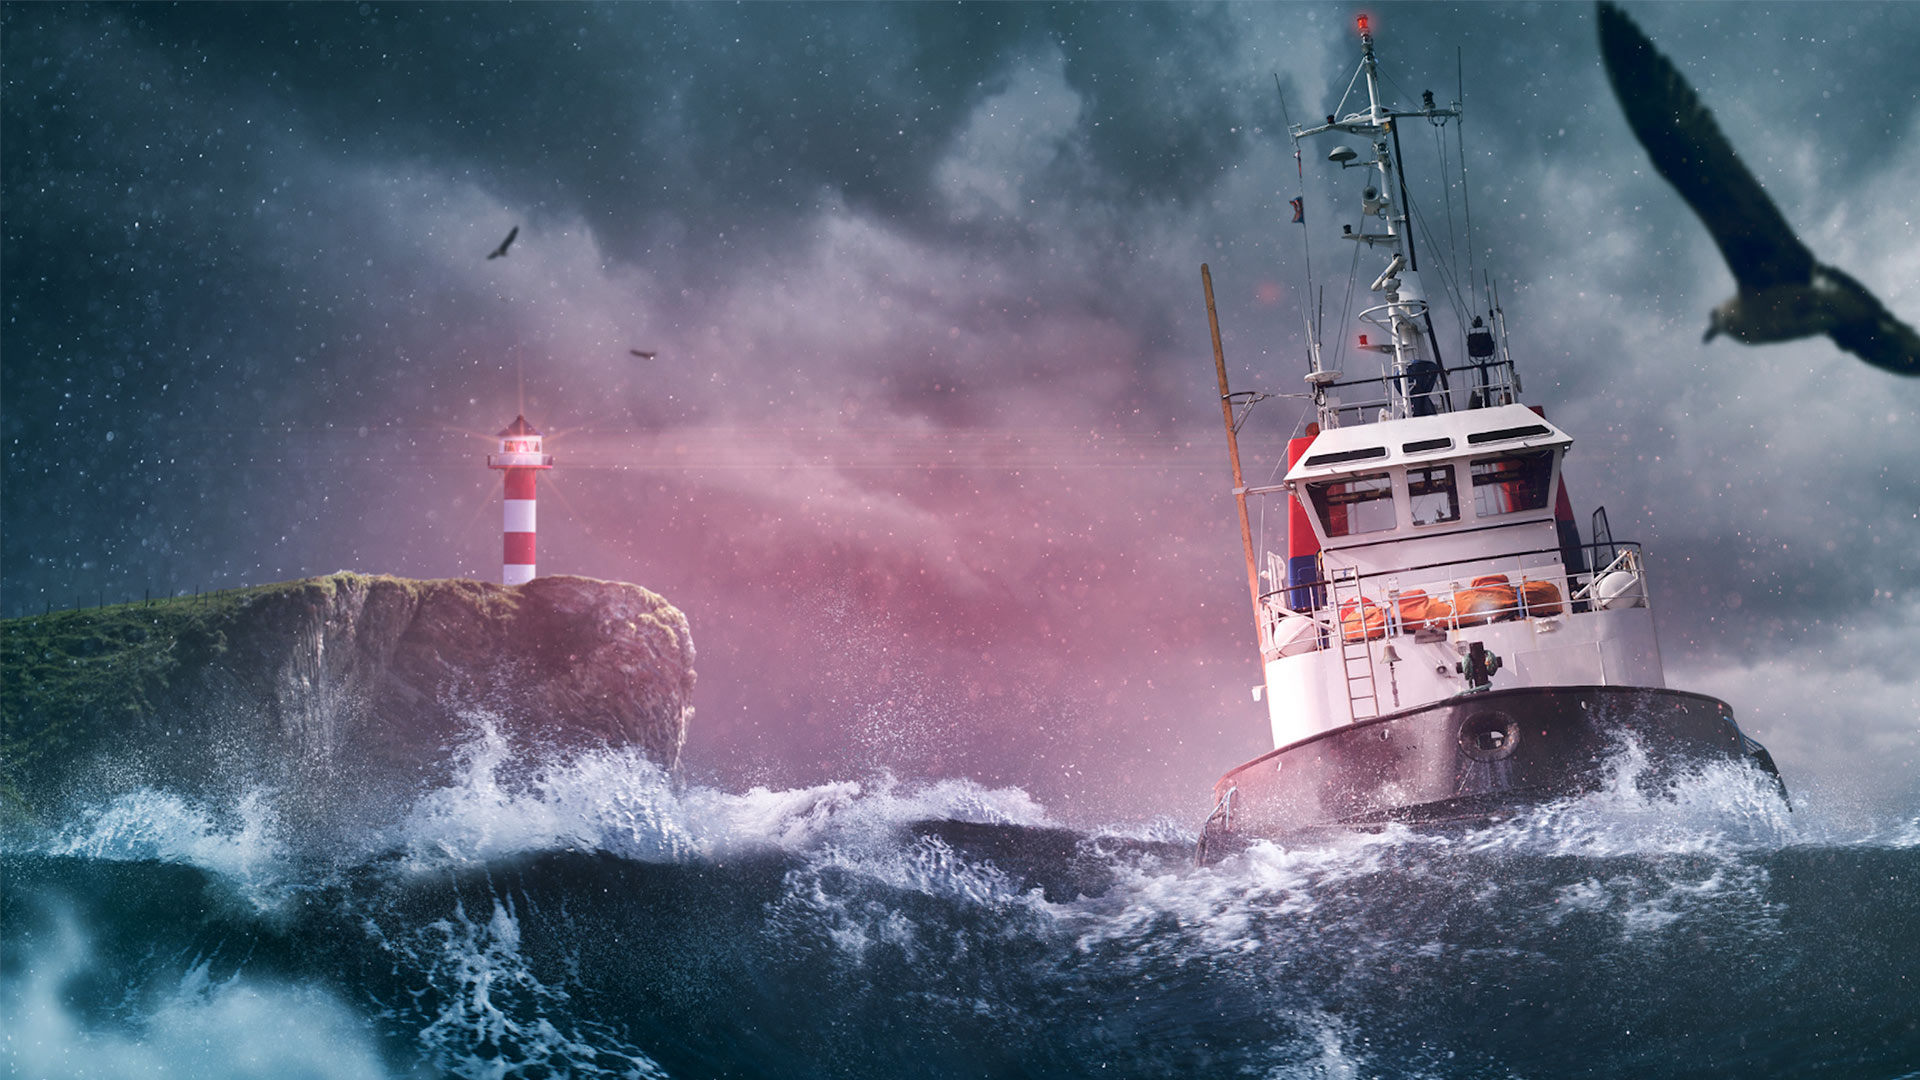 LDI: Sink the ship or weather the storm?